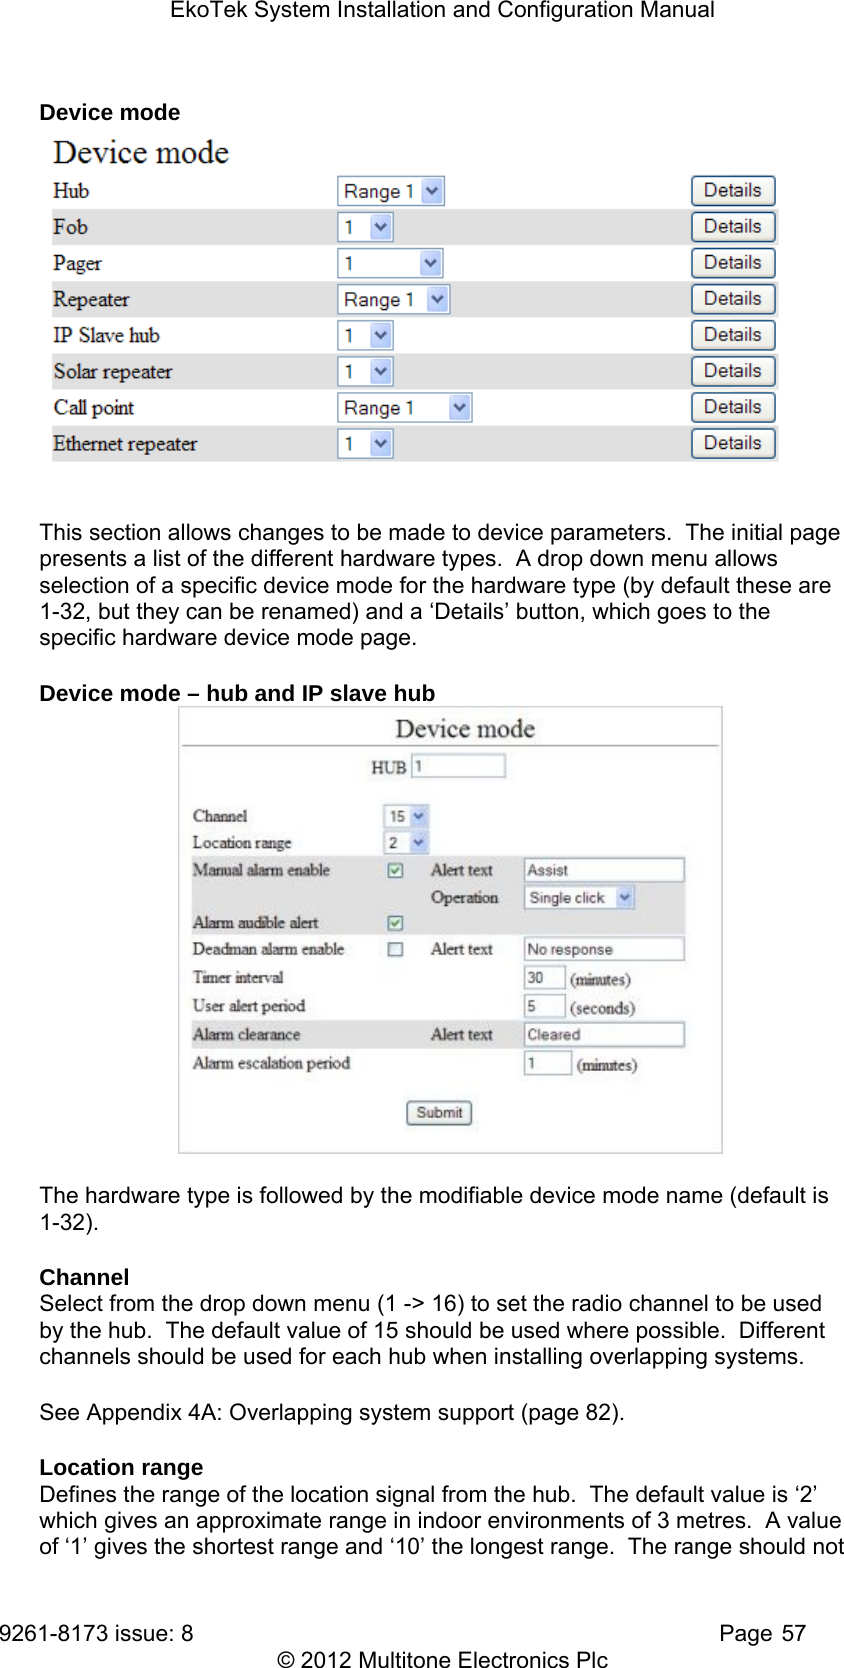 EkoTek System Installation and Configuration Manual 9261-8173 issue: 8   Page 57 © 2012 Multitone Electronics Plc Device mode  This section allows changes to be made to device parameters.  The initial page presents a list of the different hardware types.  A drop down menu allows selection of a specific device mode for the hardware type (by default these are 1-32, but they can be renamed) and a ‘Details’ button, which goes to the specific hardware device mode page. Device mode – hub and IP slave hub  The hardware type is followed by the modifiable device mode name (default is 1-32). Channel  Select from the drop down menu (1 -&gt; 16) to set the radio channel to be used by the hub.  The default value of 15 should be used where possible.  Different channels should be used for each hub when installing overlapping systems.   See Appendix 4A: Overlapping system support (page 82). Location range Defines the range of the location signal from the hub.  The default value is ‘2’ which gives an approximate range in indoor environments of 3 metres.  A value of ‘1’ gives the shortest range and ‘10’ the longest range.  The range should not 